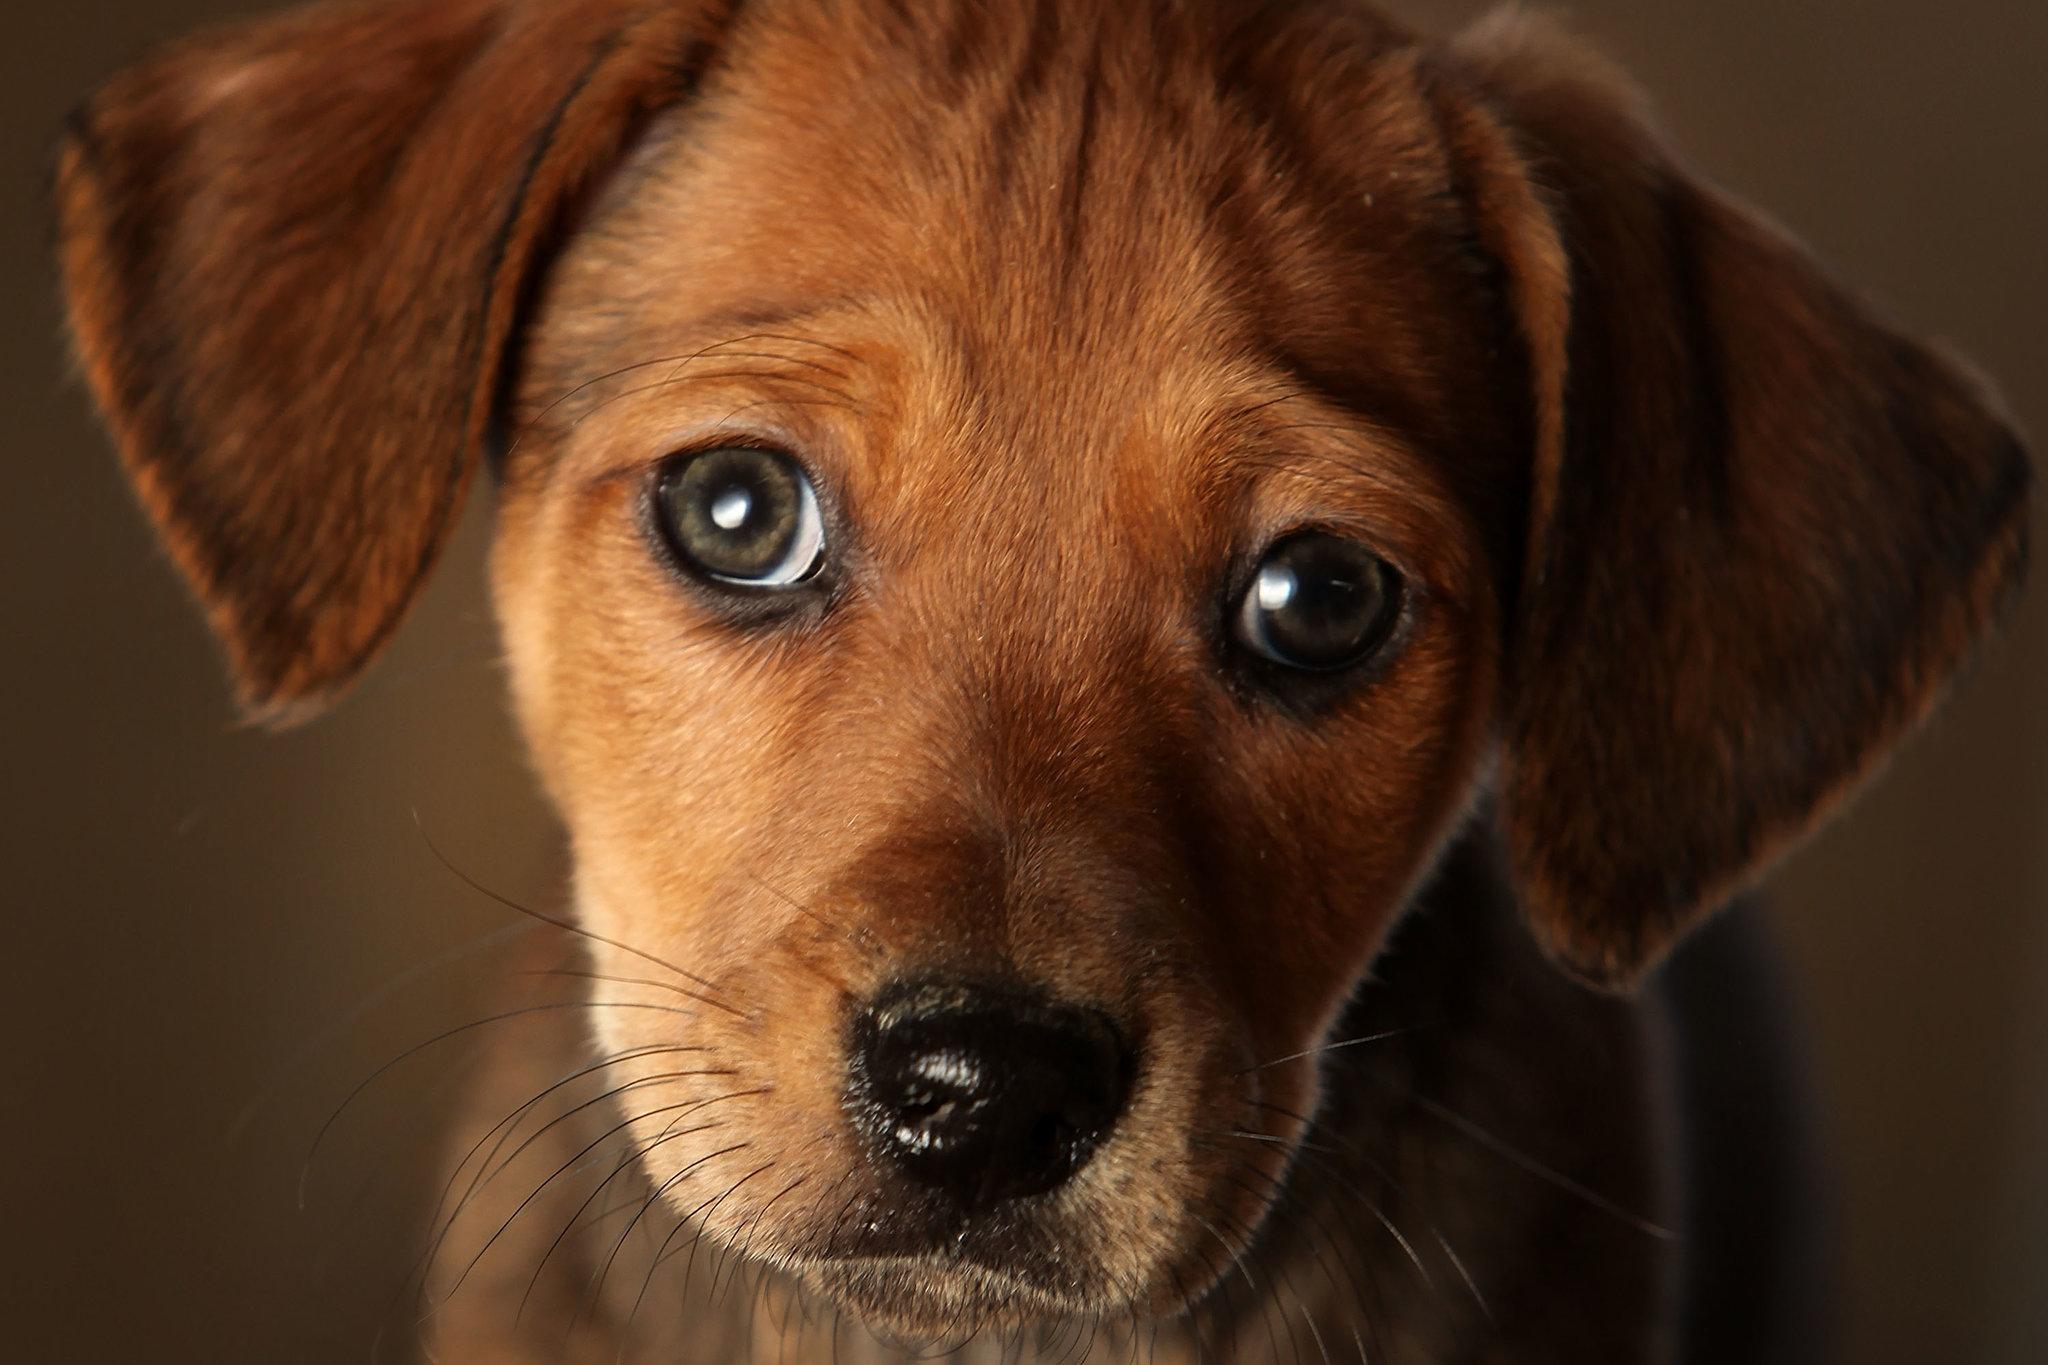 Those Puppy Dog Eyes You Can't Resist? Thank Evolution